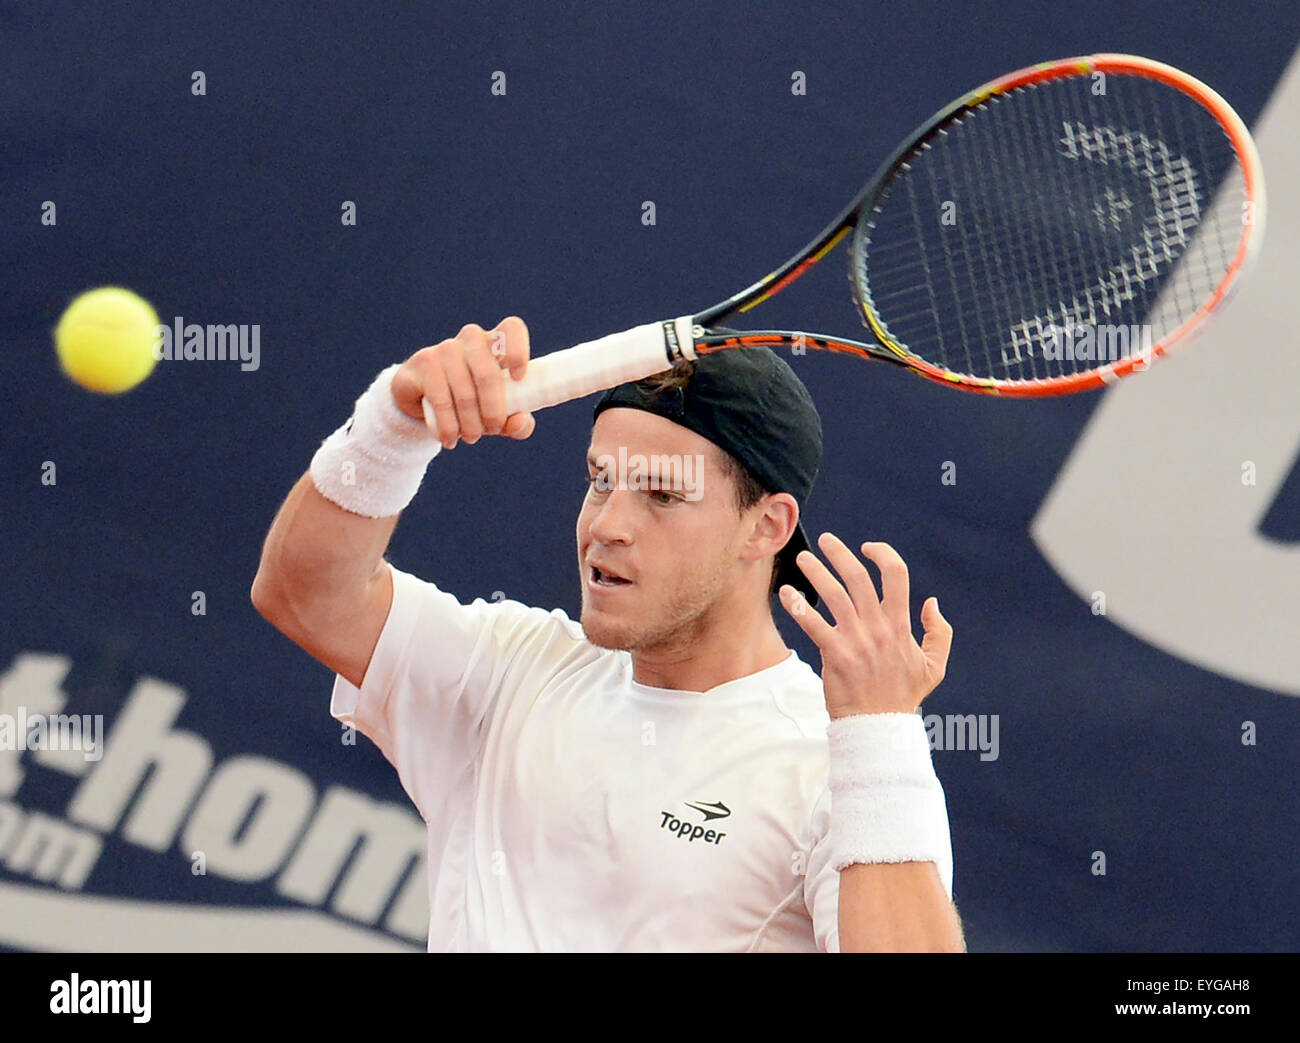 Hamburg, Germany. 29th July, 2015. Diego Schwartzman from Argentina playing  in the ATP tennis tournament in the first round against Cuevas from  Uruguay., 29 July 2015. Credit: dpa picture alliance/Alamy Live News